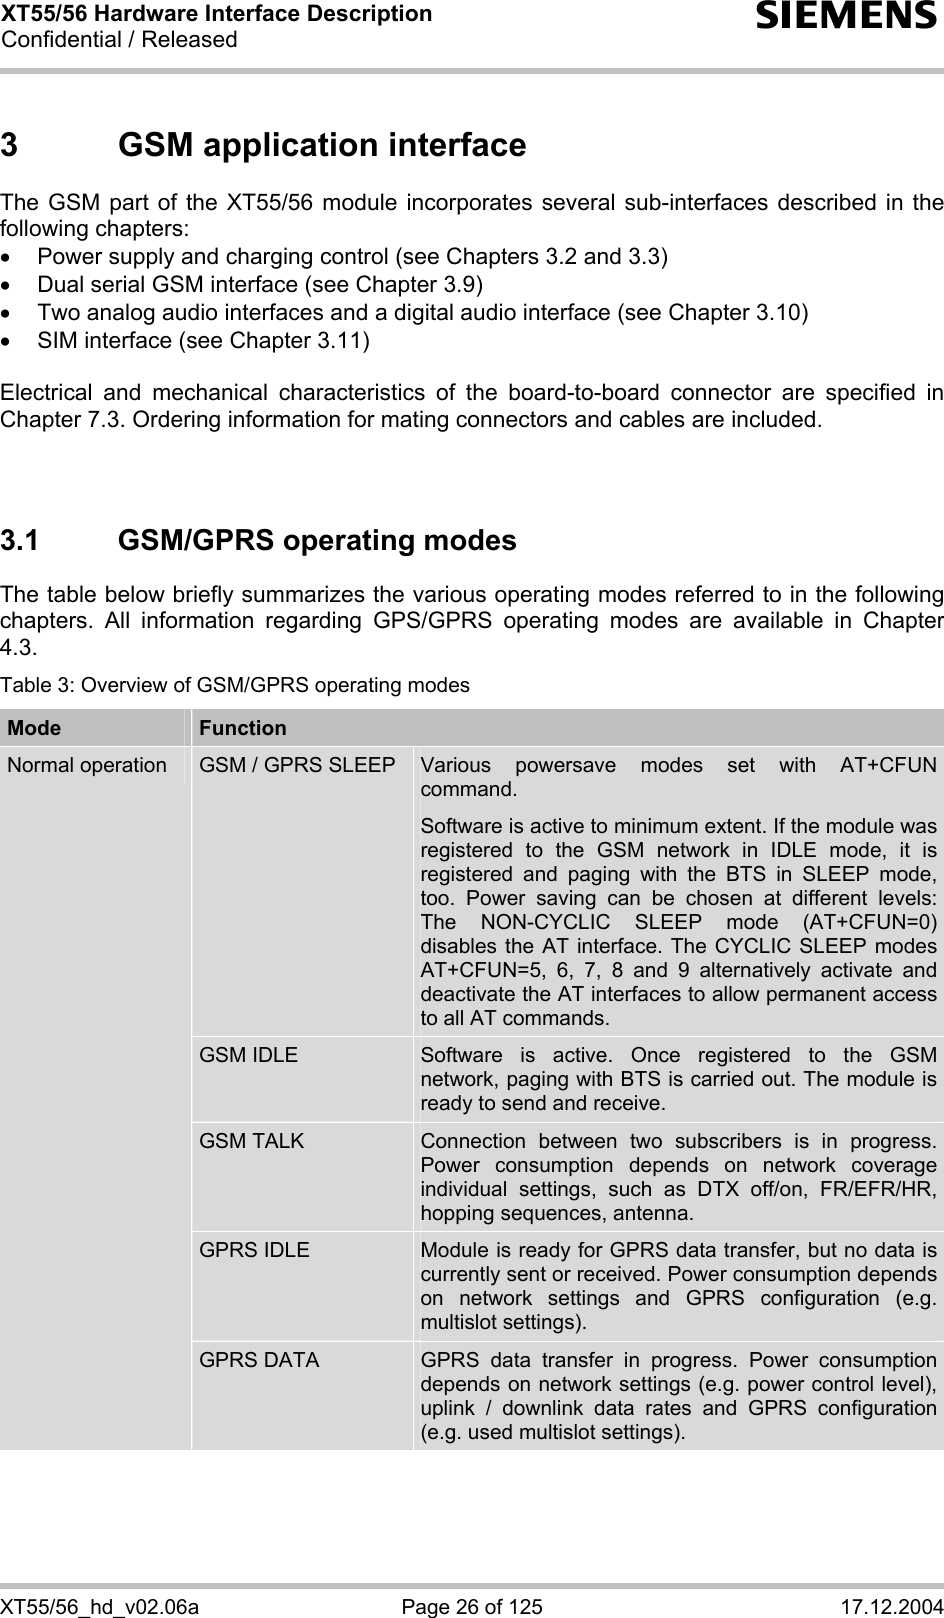 XT55/56 Hardware Interface Description Confidential / Released s XT55/56_hd_v02.06a  Page 26 of 125  17.12.2004 3  GSM application interface The GSM part of the XT55/56 module incorporates several sub-interfaces described in the following chapters: •  Power supply and charging control (see Chapters 3.2 and 3.3) •  Dual serial GSM interface (see Chapter 3.9) •  Two analog audio interfaces and a digital audio interface (see Chapter 3.10) •  SIM interface (see Chapter 3.11)  Electrical and mechanical characteristics of the board-to-board connector are specified in Chapter 7.3. Ordering information for mating connectors and cables are included.   3.1  GSM/GPRS operating modes The table below briefly summarizes the various operating modes referred to in the following chapters. All information regarding GPS/GPRS operating modes are available in Chapter 4.3. Table 3: Overview of GSM/GPRS operating modes Mode  Function GSM / GPRS SLEEP  Various powersave modes set with AT+CFUN command.  Software is active to minimum extent. If the module was registered to the GSM network in IDLE mode, it is registered and paging with the BTS in SLEEP mode, too. Power saving can be chosen at different levels: The NON-CYCLIC SLEEP mode (AT+CFUN=0) disables the AT interface. The CYCLIC SLEEP modes AT+CFUN=5, 6, 7, 8 and 9 alternatively activate and deactivate the AT interfaces to allow permanent access to all AT commands. GSM IDLE  Software is active. Once registered to the GSM network, paging with BTS is carried out. The module is ready to send and receive. GSM TALK  Connection between two subscribers is in progress. Power consumption depends on network coverage individual settings, such as DTX off/on, FR/EFR/HR, hopping sequences, antenna. GPRS IDLE  Module is ready for GPRS data transfer, but no data is currently sent or received. Power consumption depends on network settings and GPRS configuration (e.g. multislot settings). Normal operation GPRS DATA  GPRS data transfer in progress. Power consumption depends on network settings (e.g. power control level), uplink / downlink data rates and GPRS configuration (e.g. used multislot settings). 